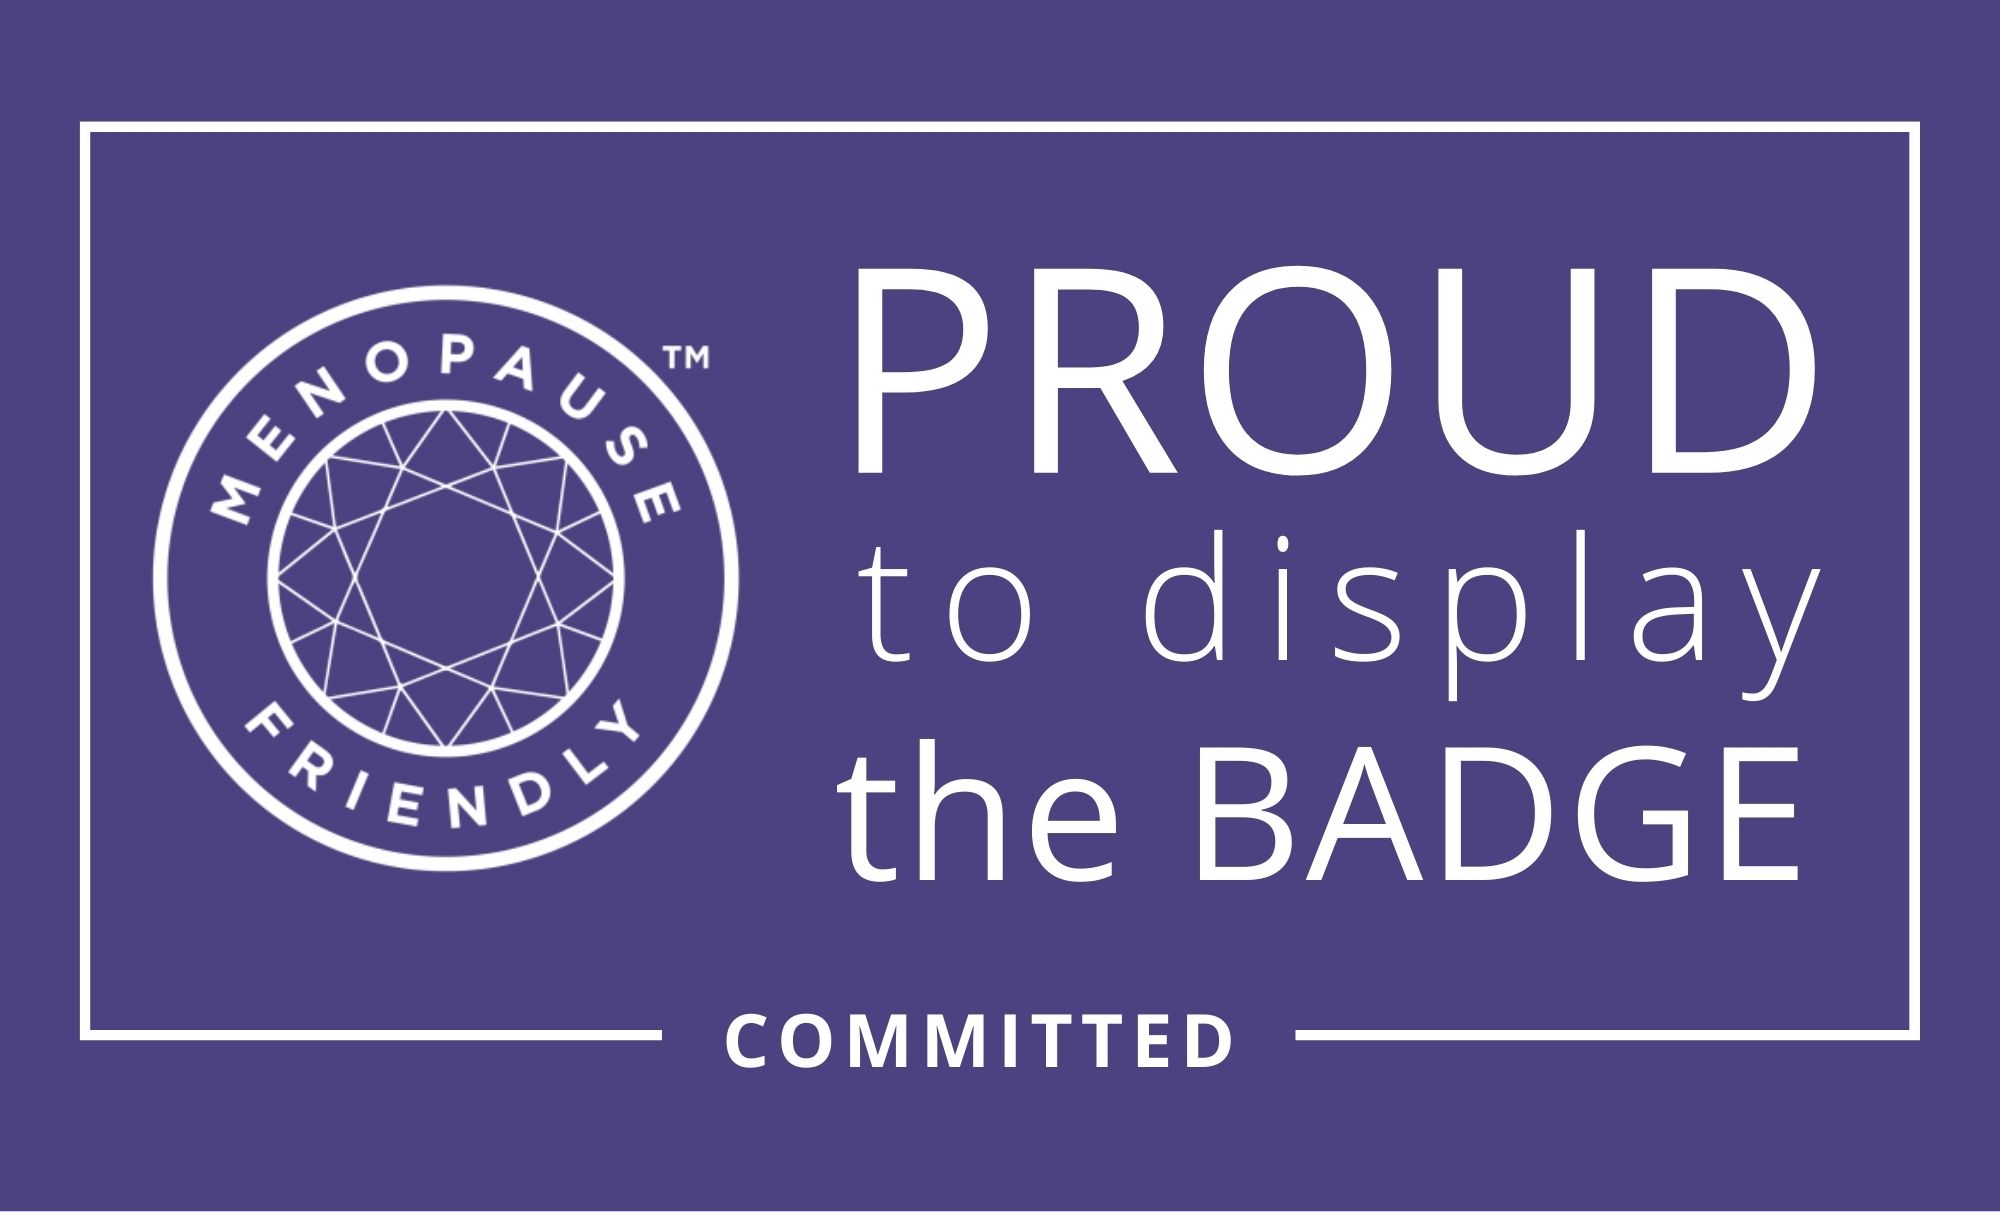 Proud to display the badge Committed